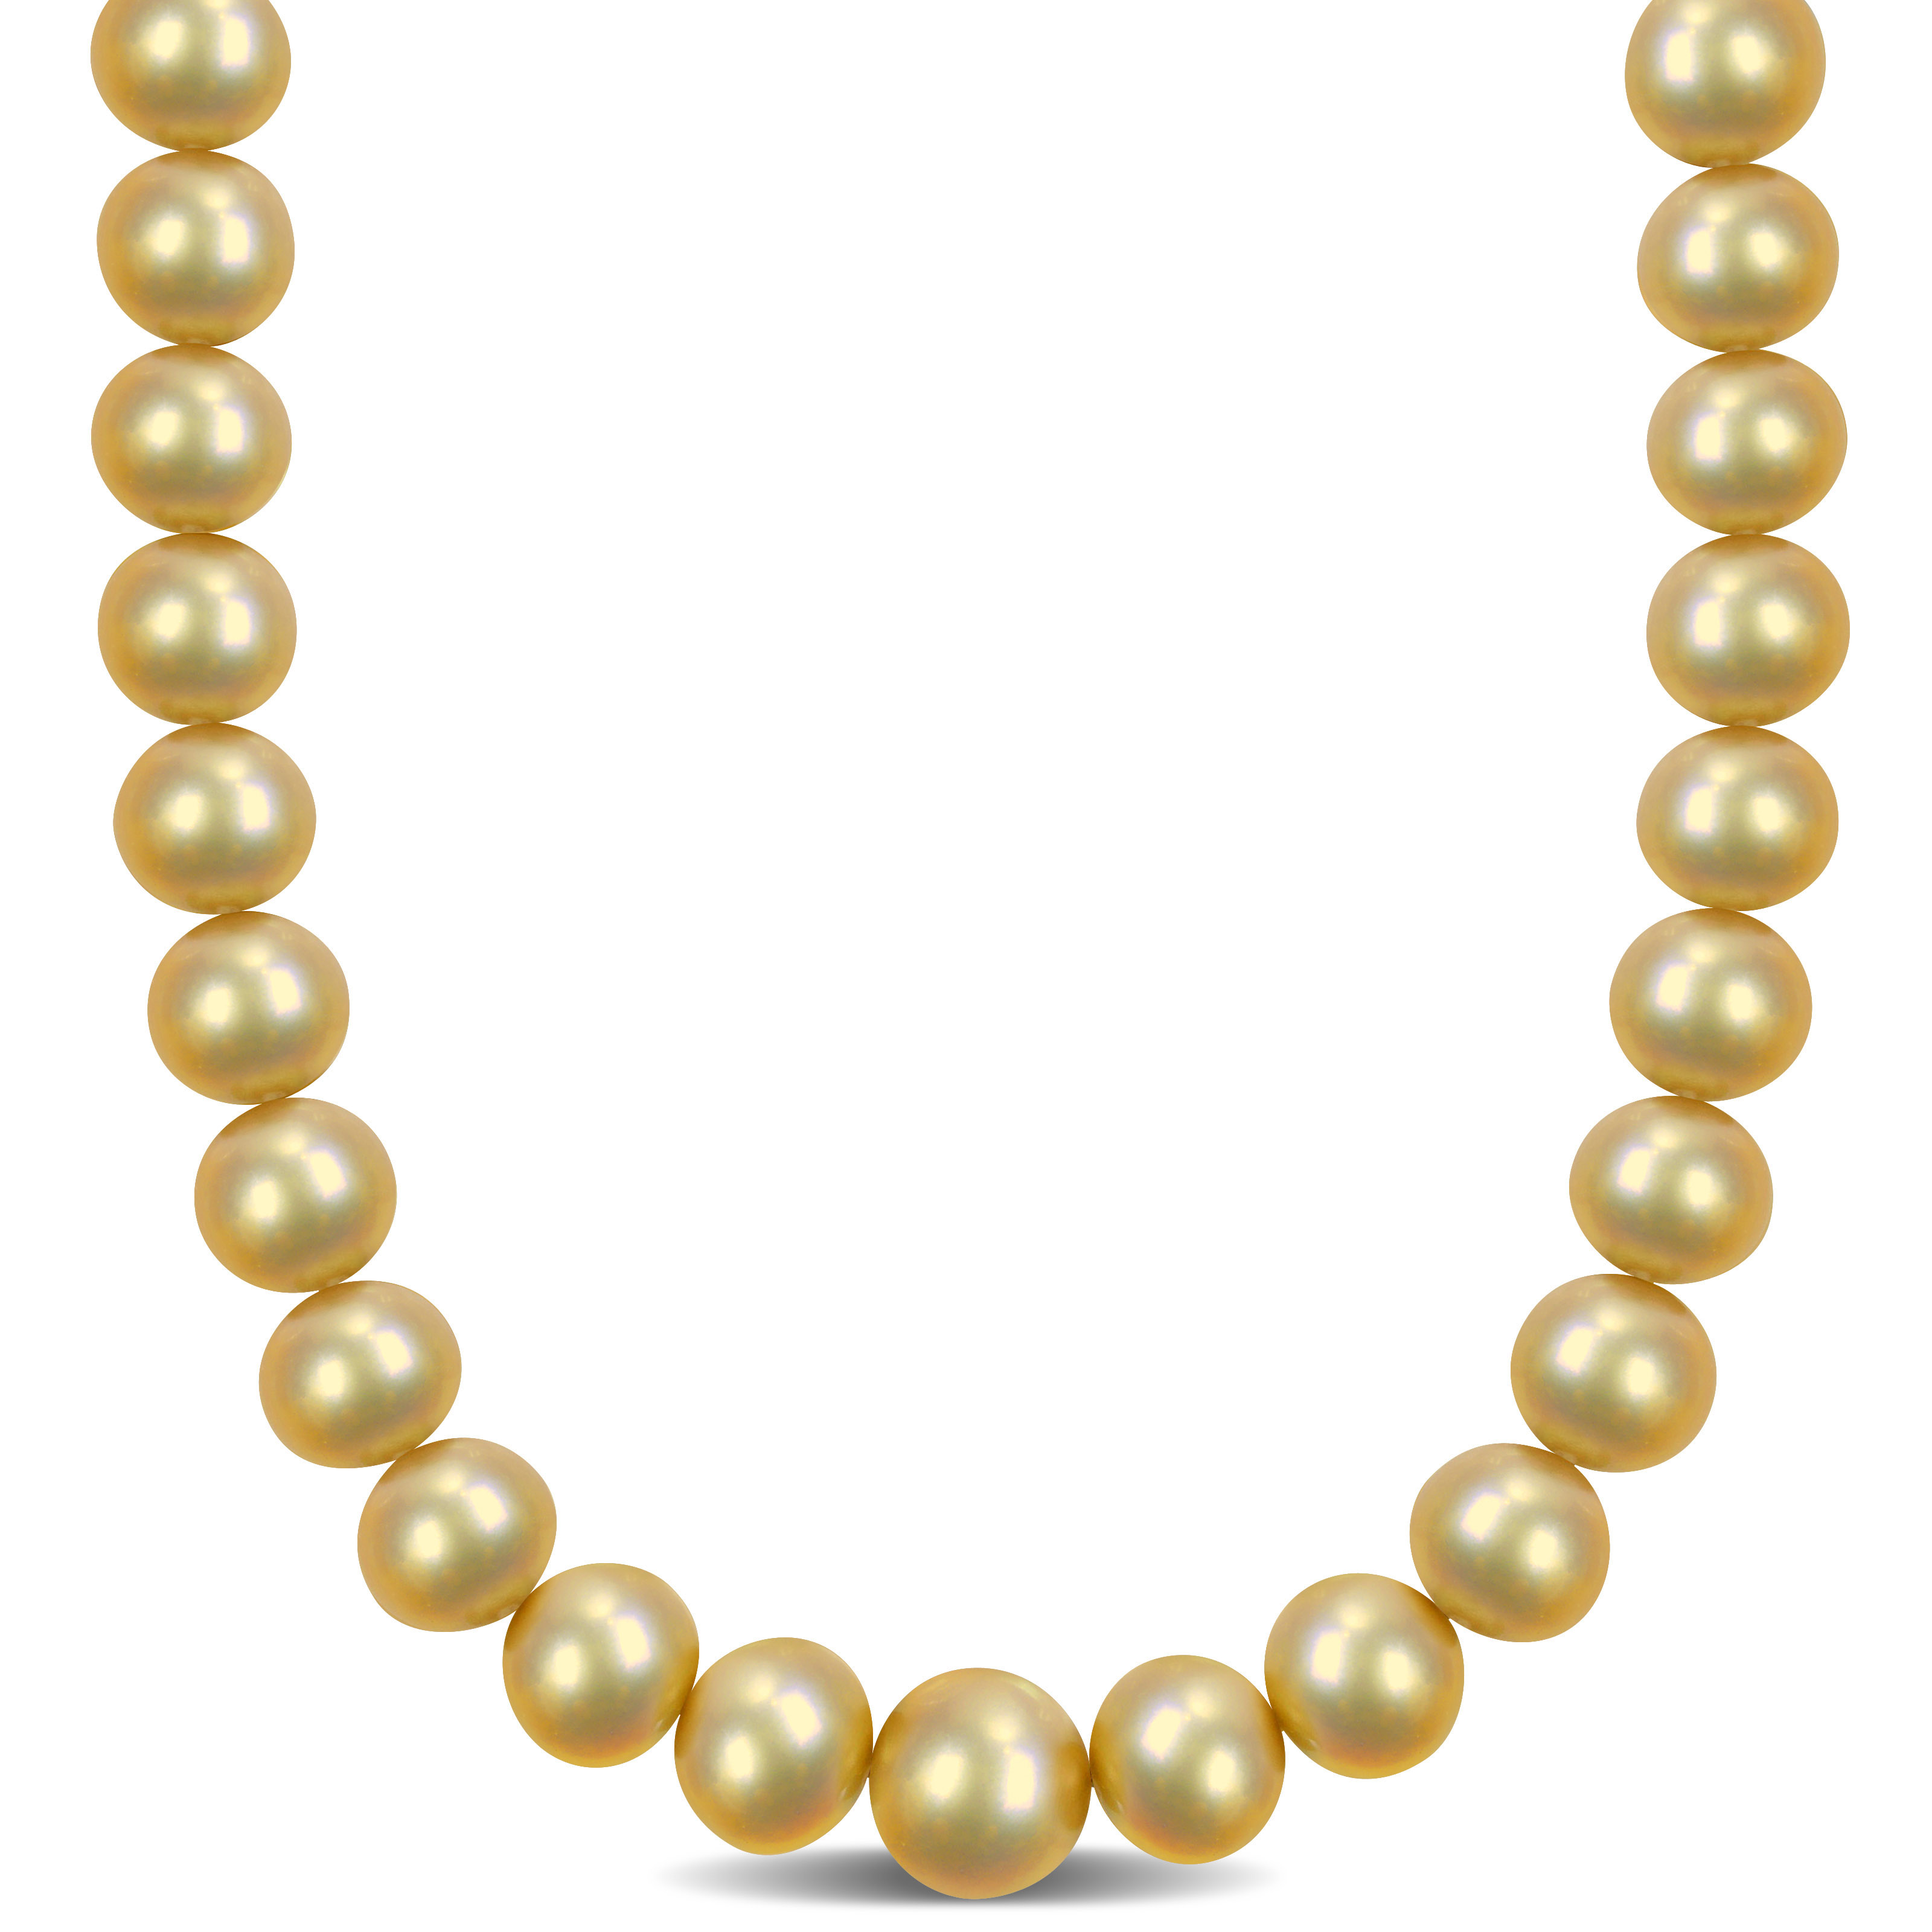 14-16.5 MM Golden South Sea Cultured Graduated Necklace in 14k Yellow Gold - 18 in